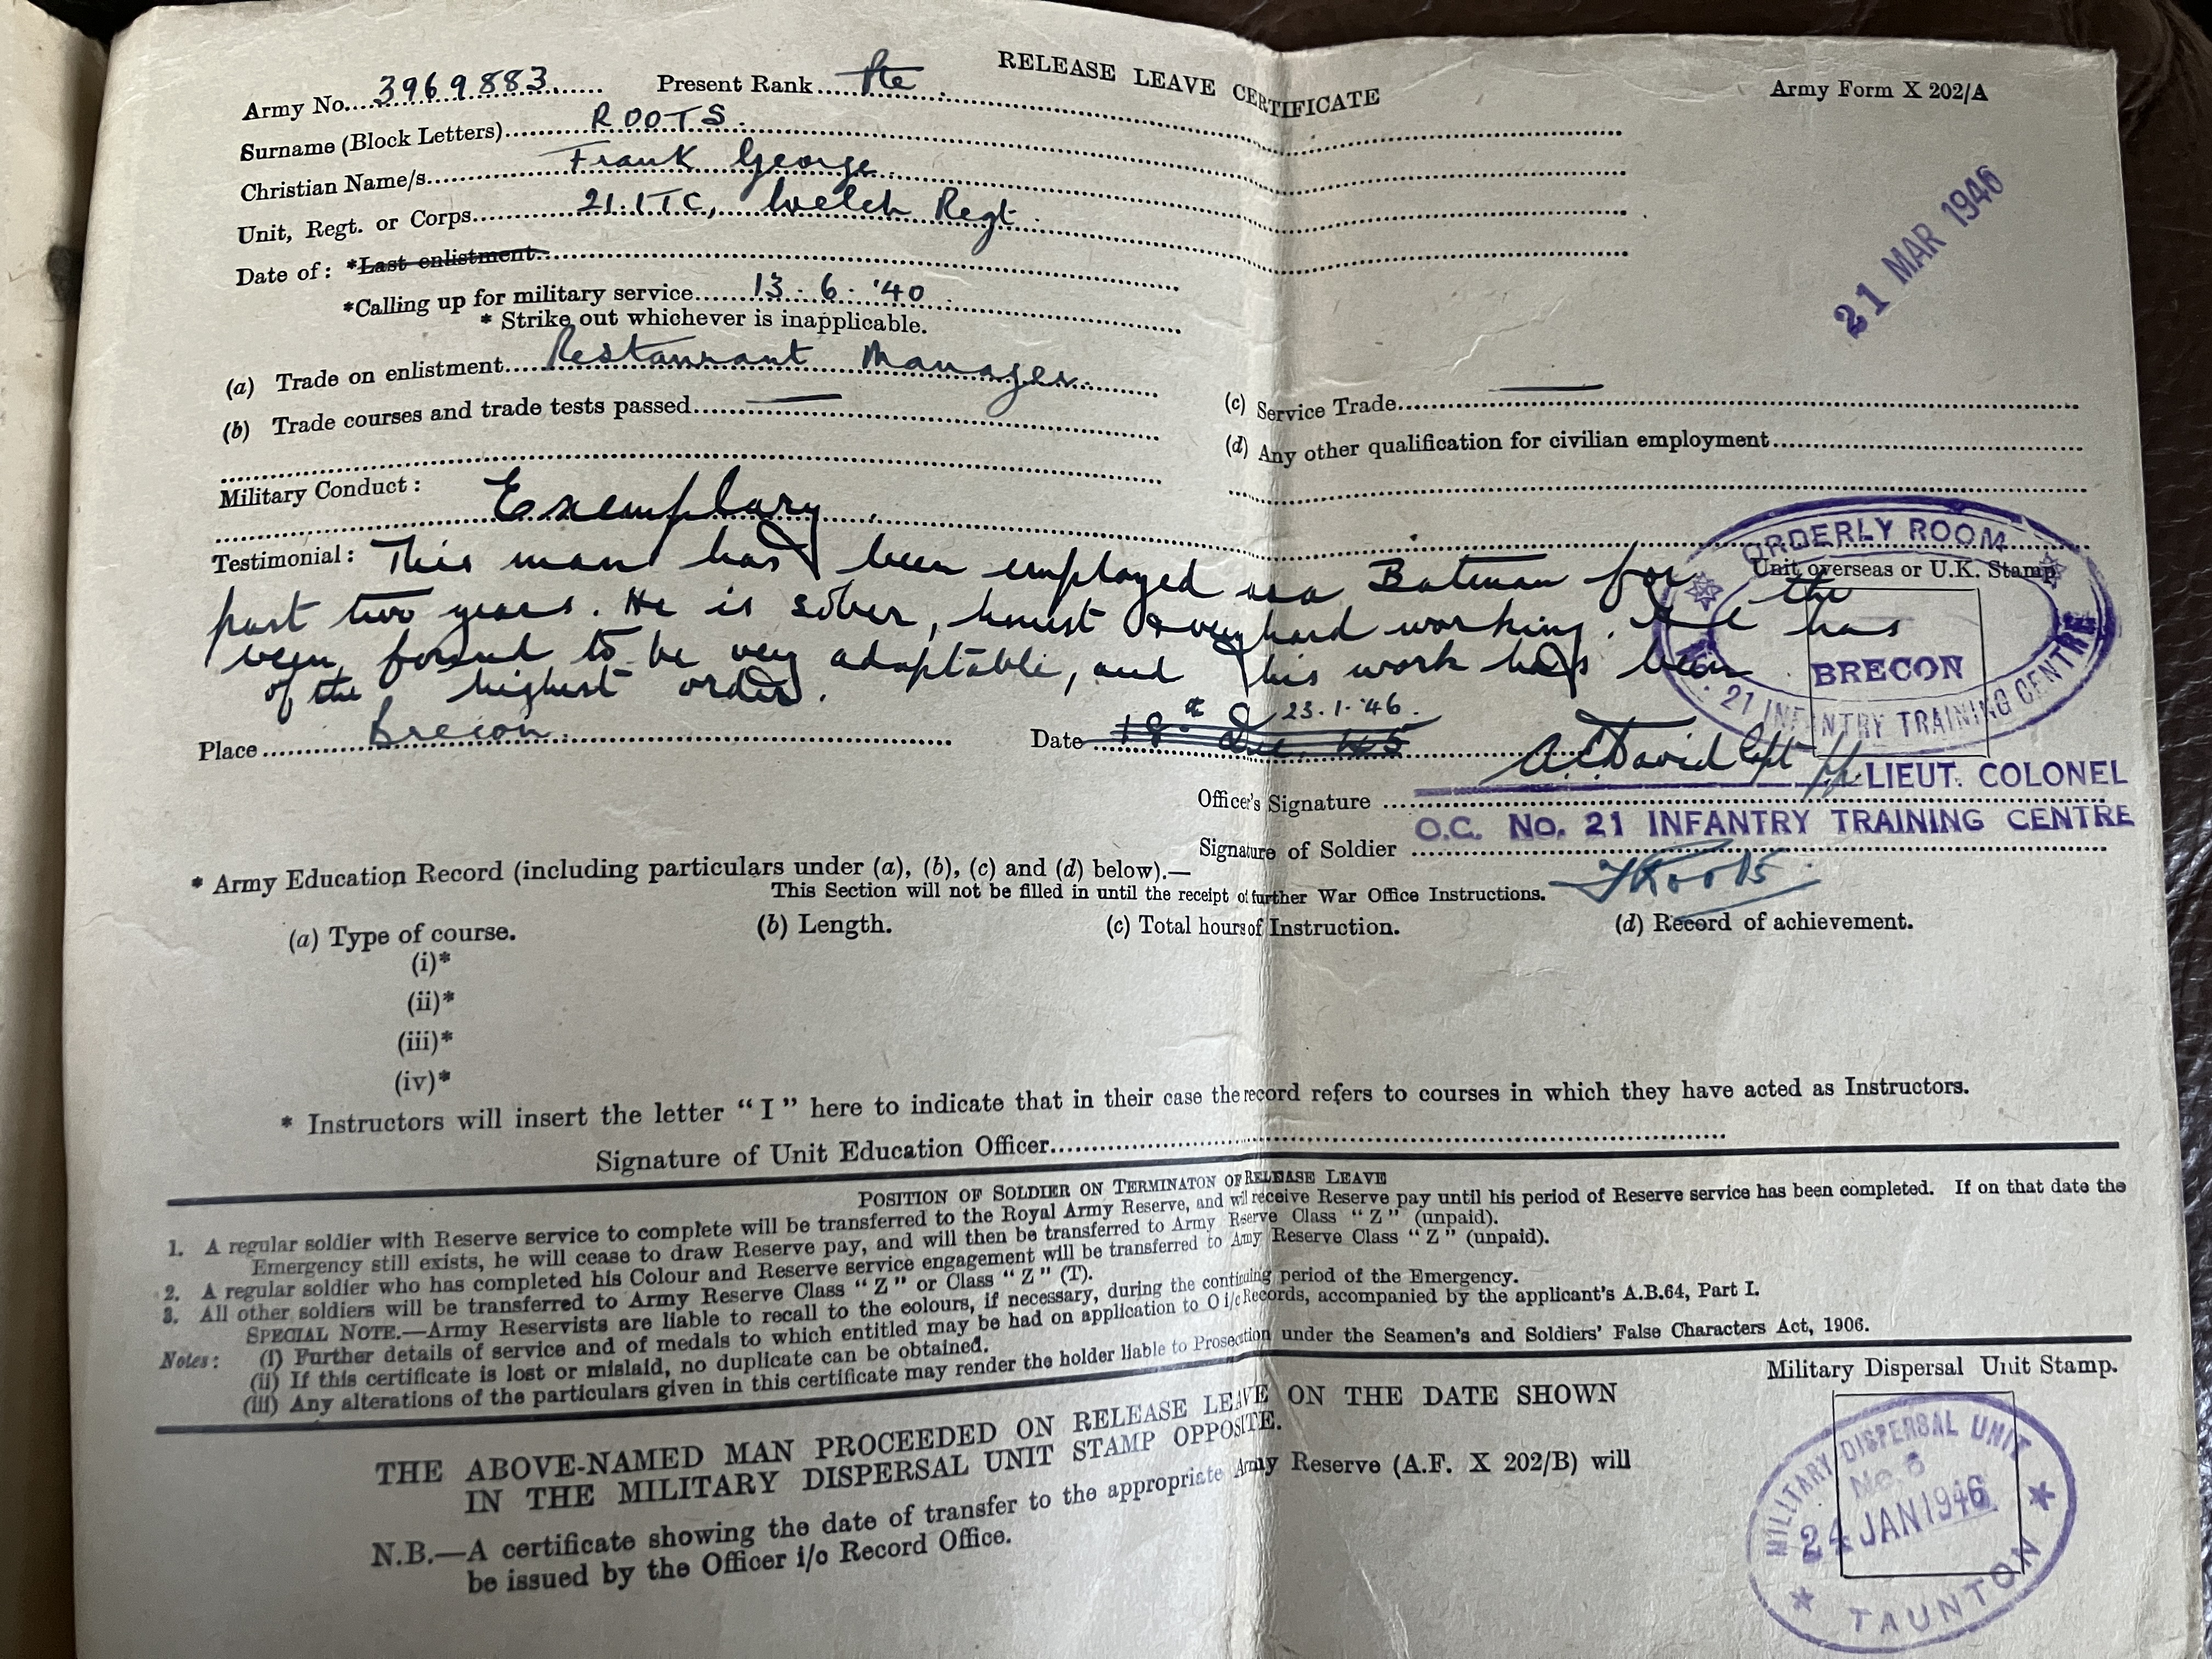 Frank George Roots army release certificate (from M Marciano)